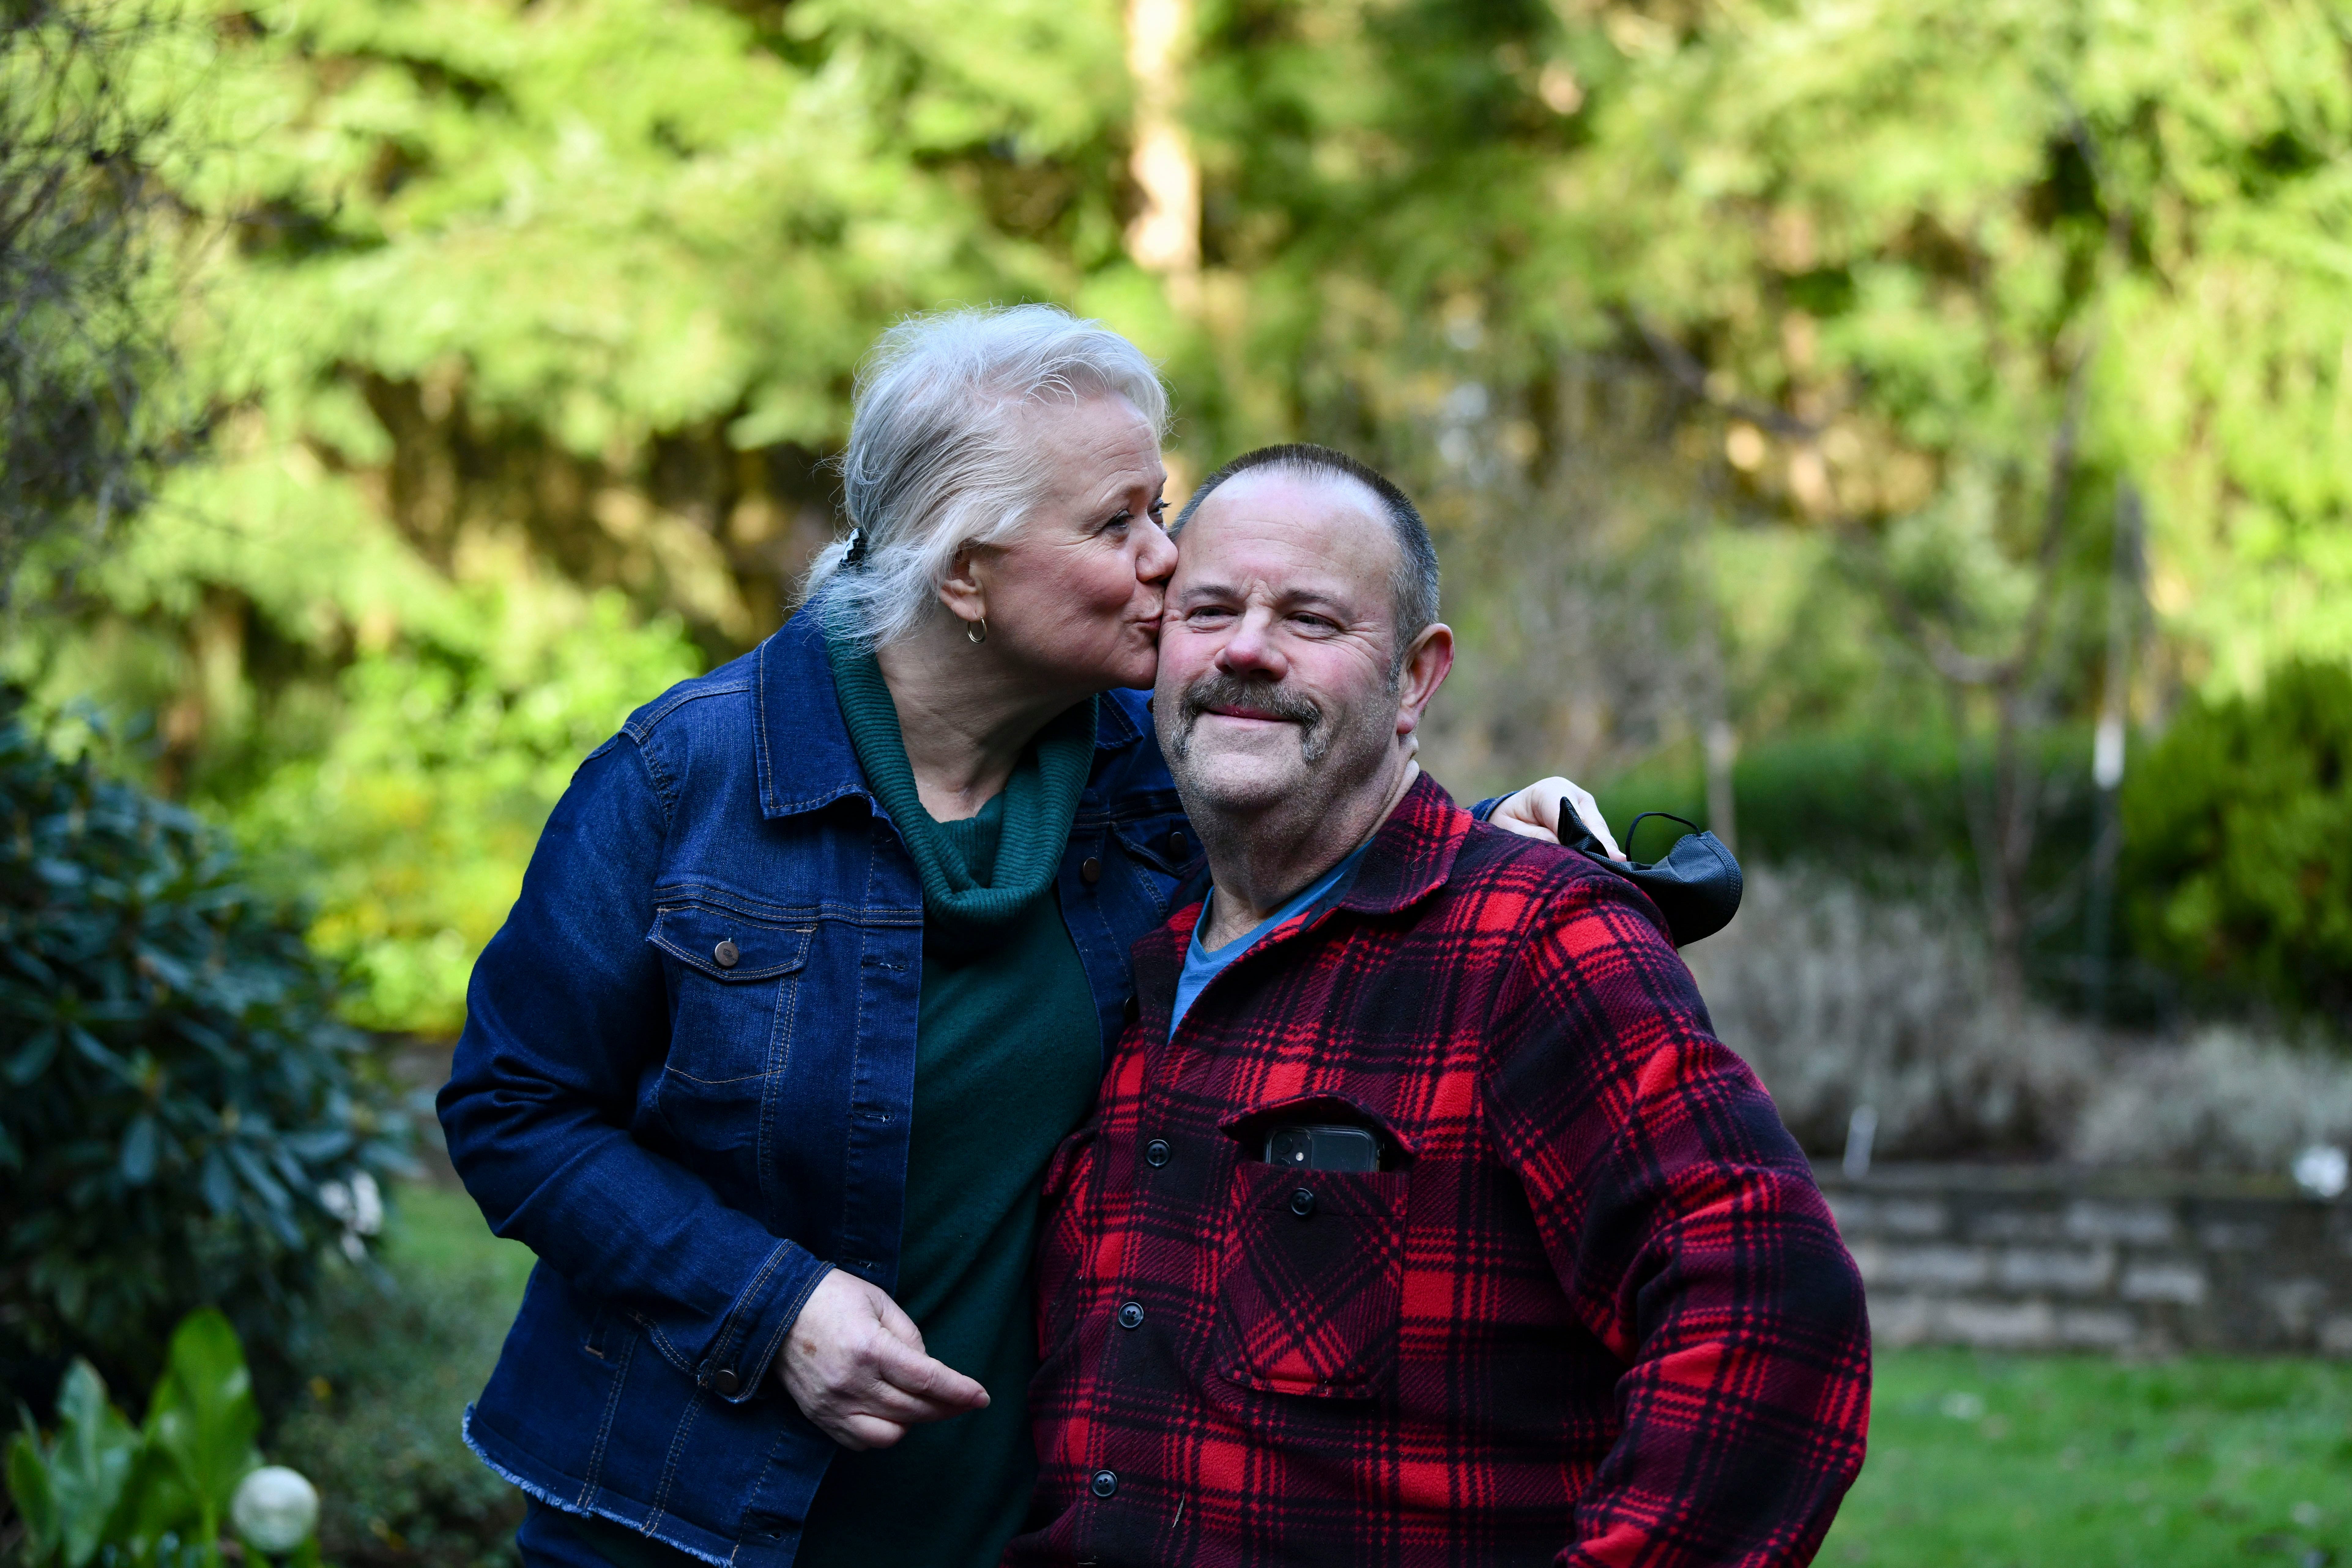 Peggy and Steve Jahn plan to renew their vows Sunday outside their church. Their son, Peter, is trying to learn how to play the theme song of the 1950s sitcom "Leave It to Beaver" on the guitar, as a tribute to when Peggy walked down the aisle 32 years ago to the same song played on a harp.